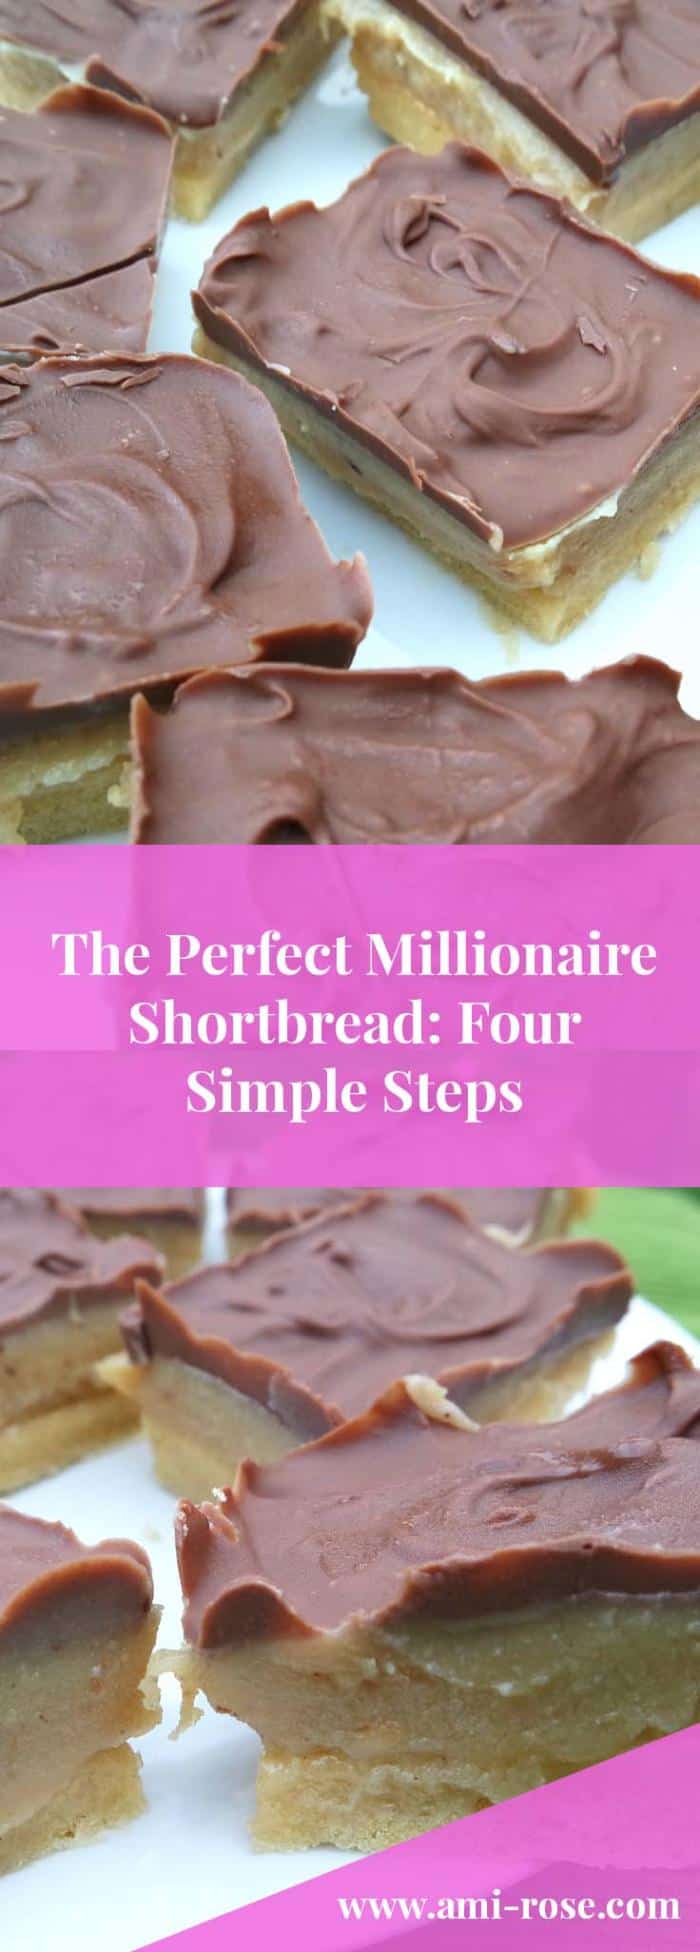 The Perfect Millionaire Shortbread in just 4 Simple Steps. A household favourite!